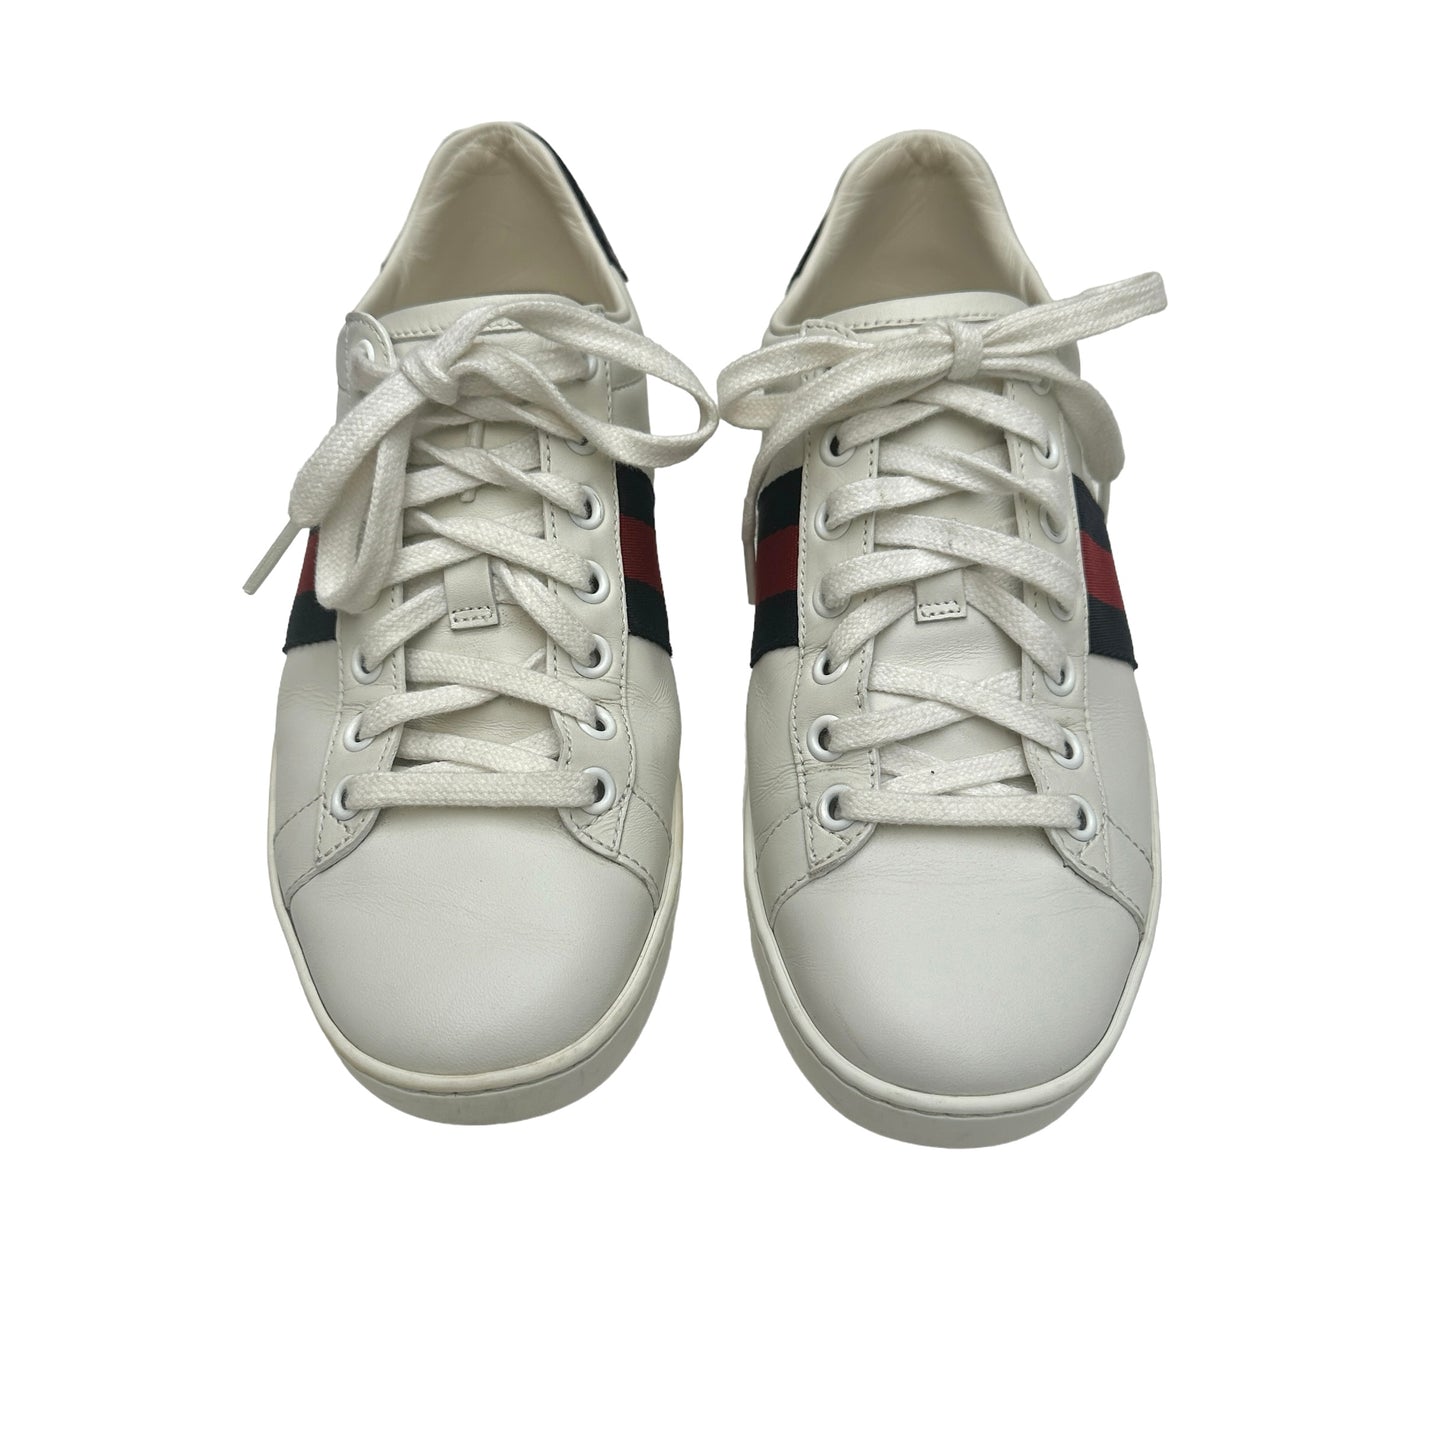 White Leather Sneakers - 6